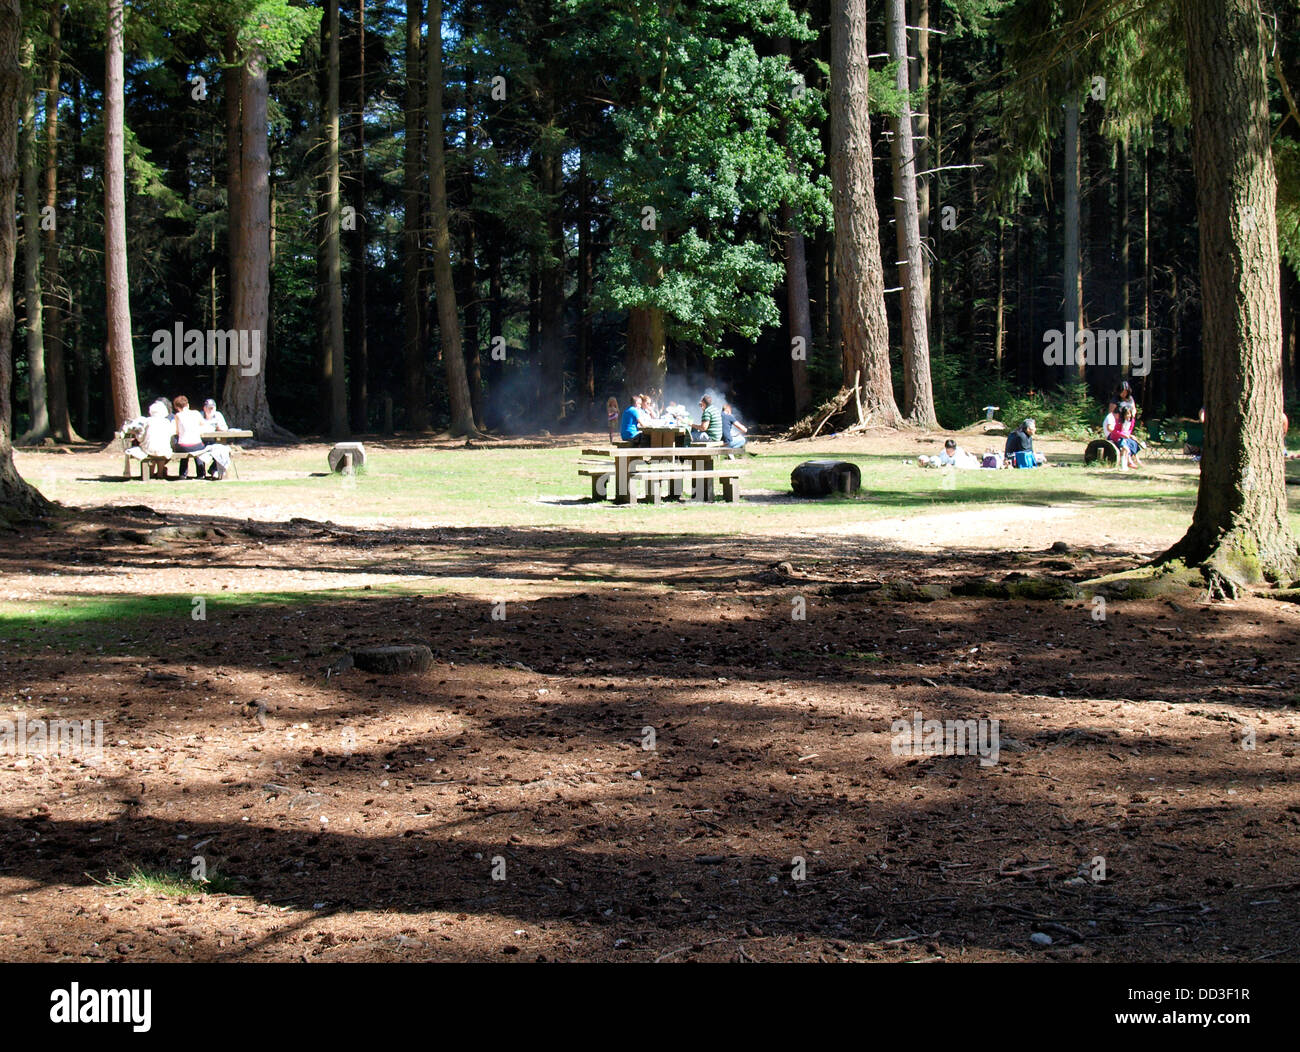 Picnic area in the woods, Bolderwood park, New Forest, Hampshire, UK 2013 Stock Photo